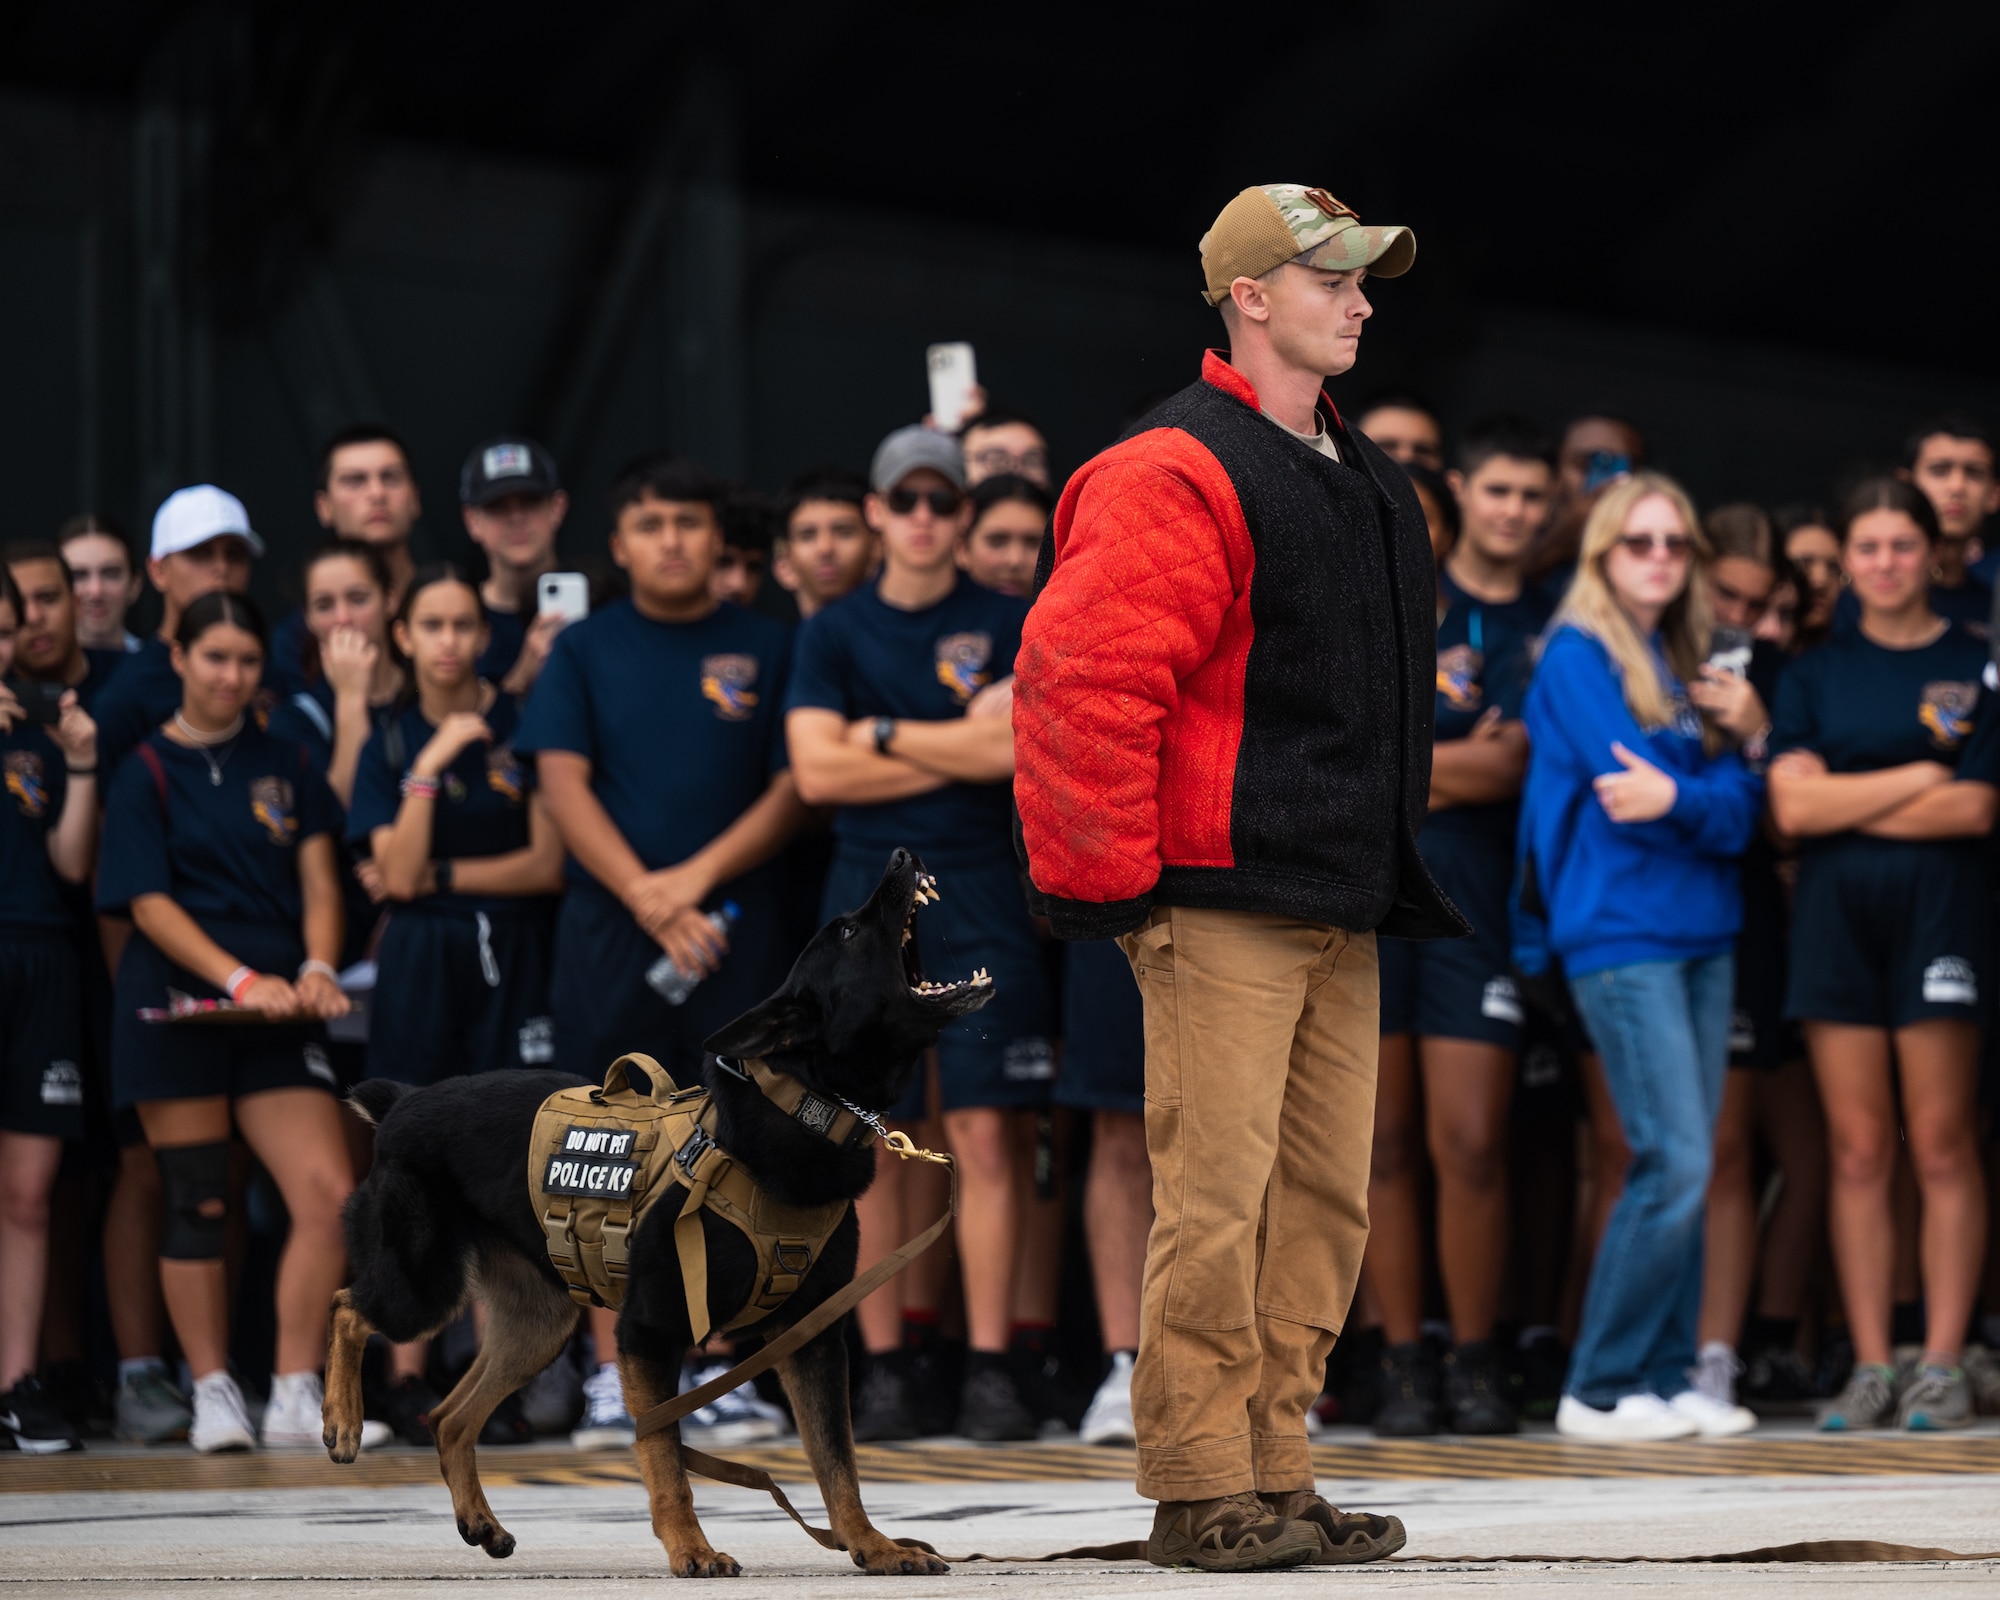 The event showcased various aspects of the military to inspire students who have an interest in operations at MacDill AFB and a career in the military. (U.S. Air Force photo by Tech. Sgt. Alexander Cook)